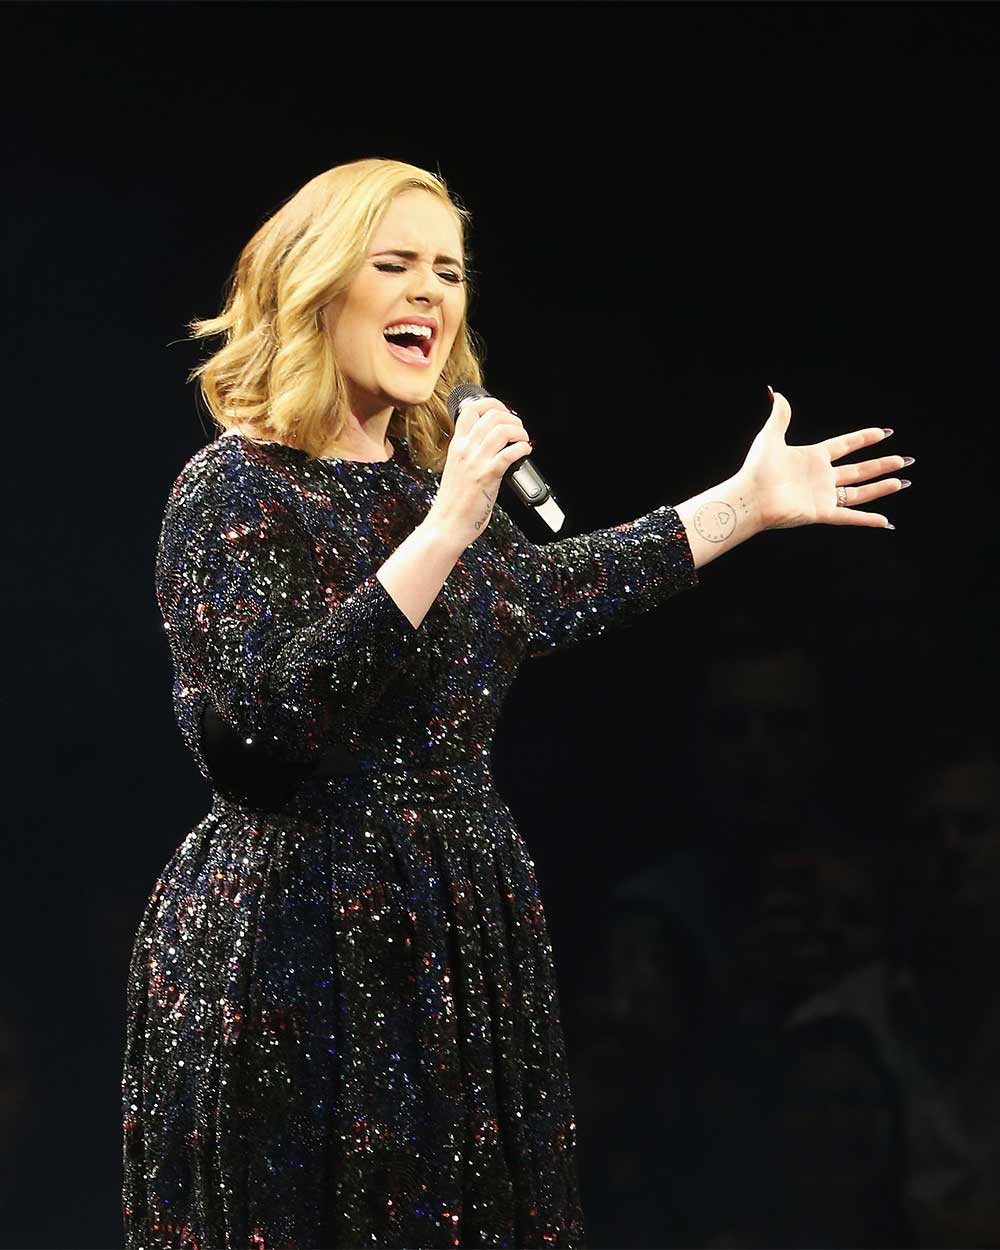 Adele forgot her own lyrics and her reaction is LOL